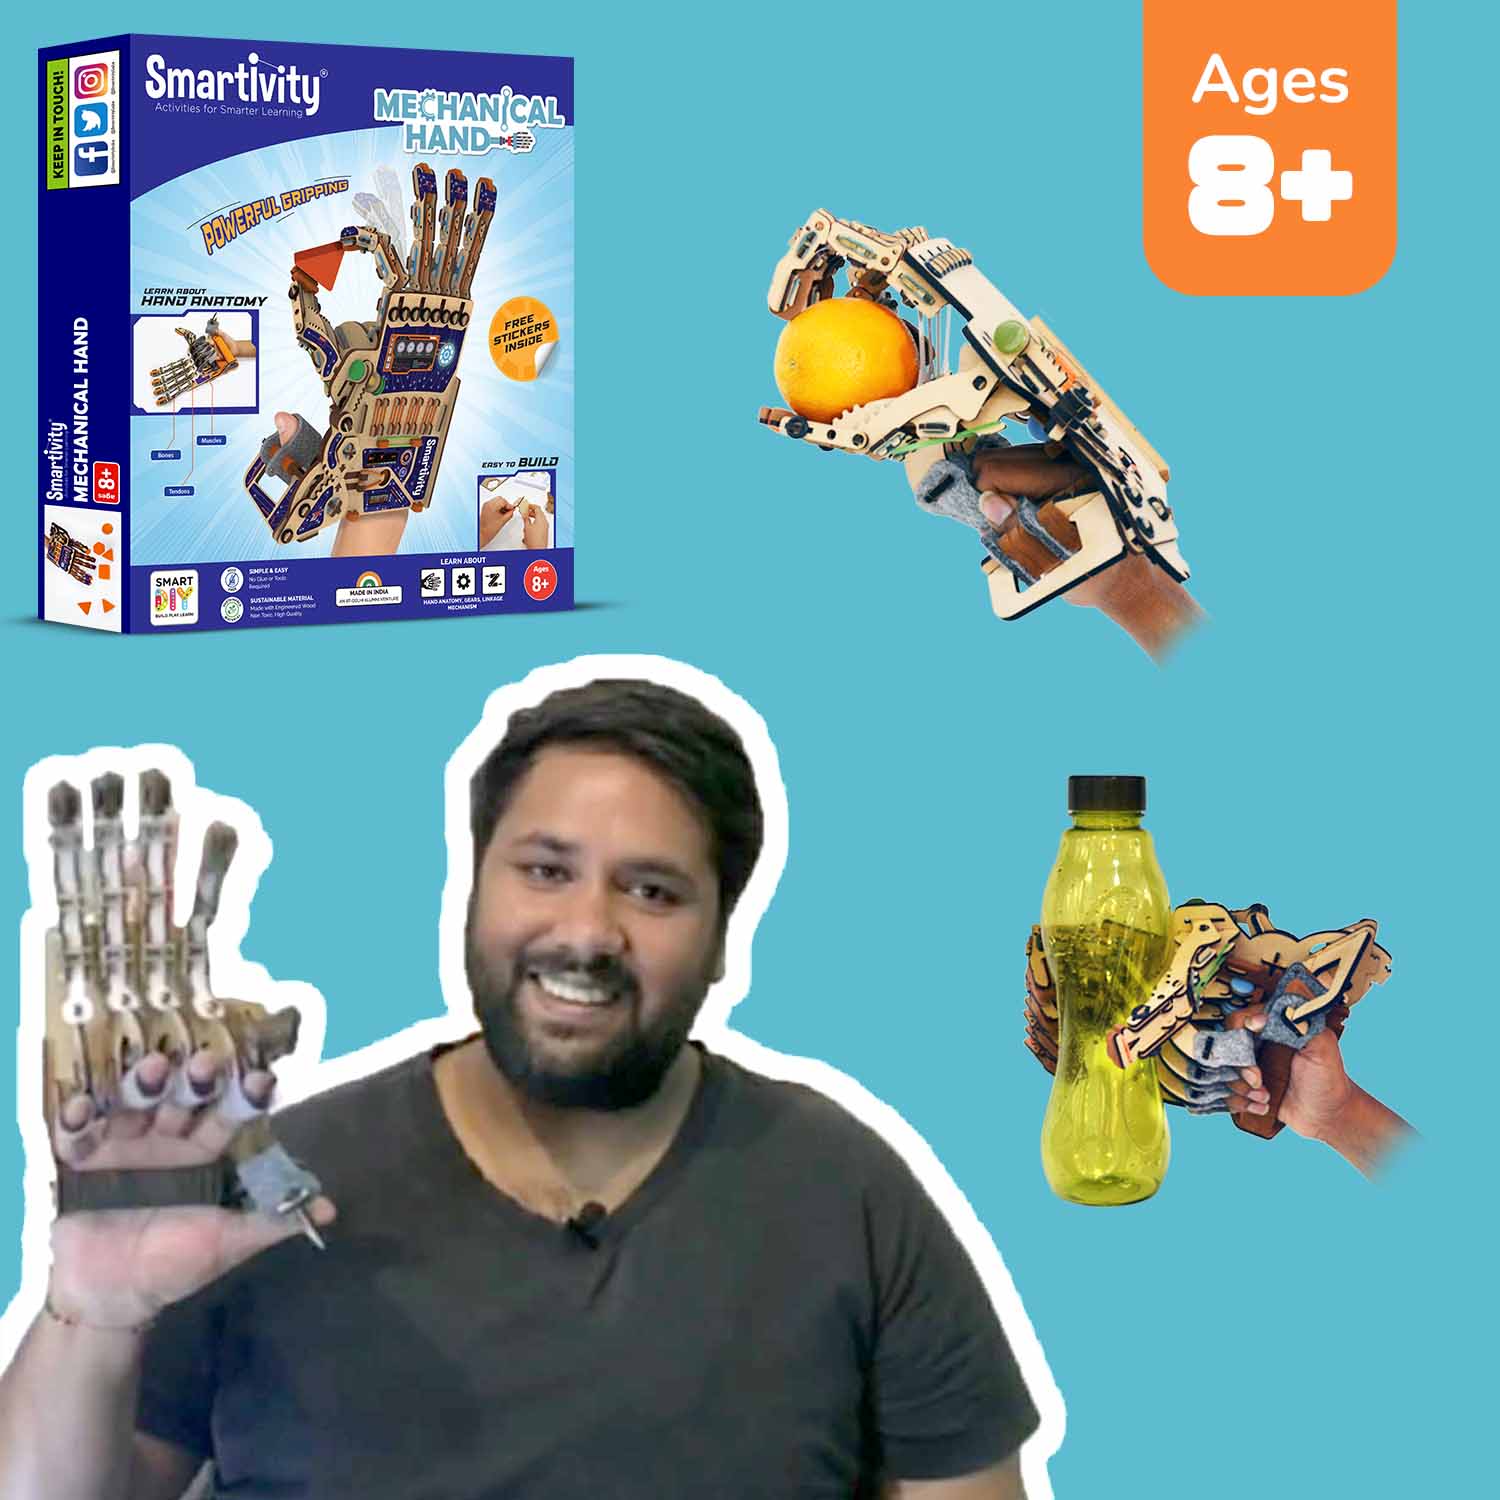 Mechanical Hand | 8-14 years | DIY STEM Construction Toy